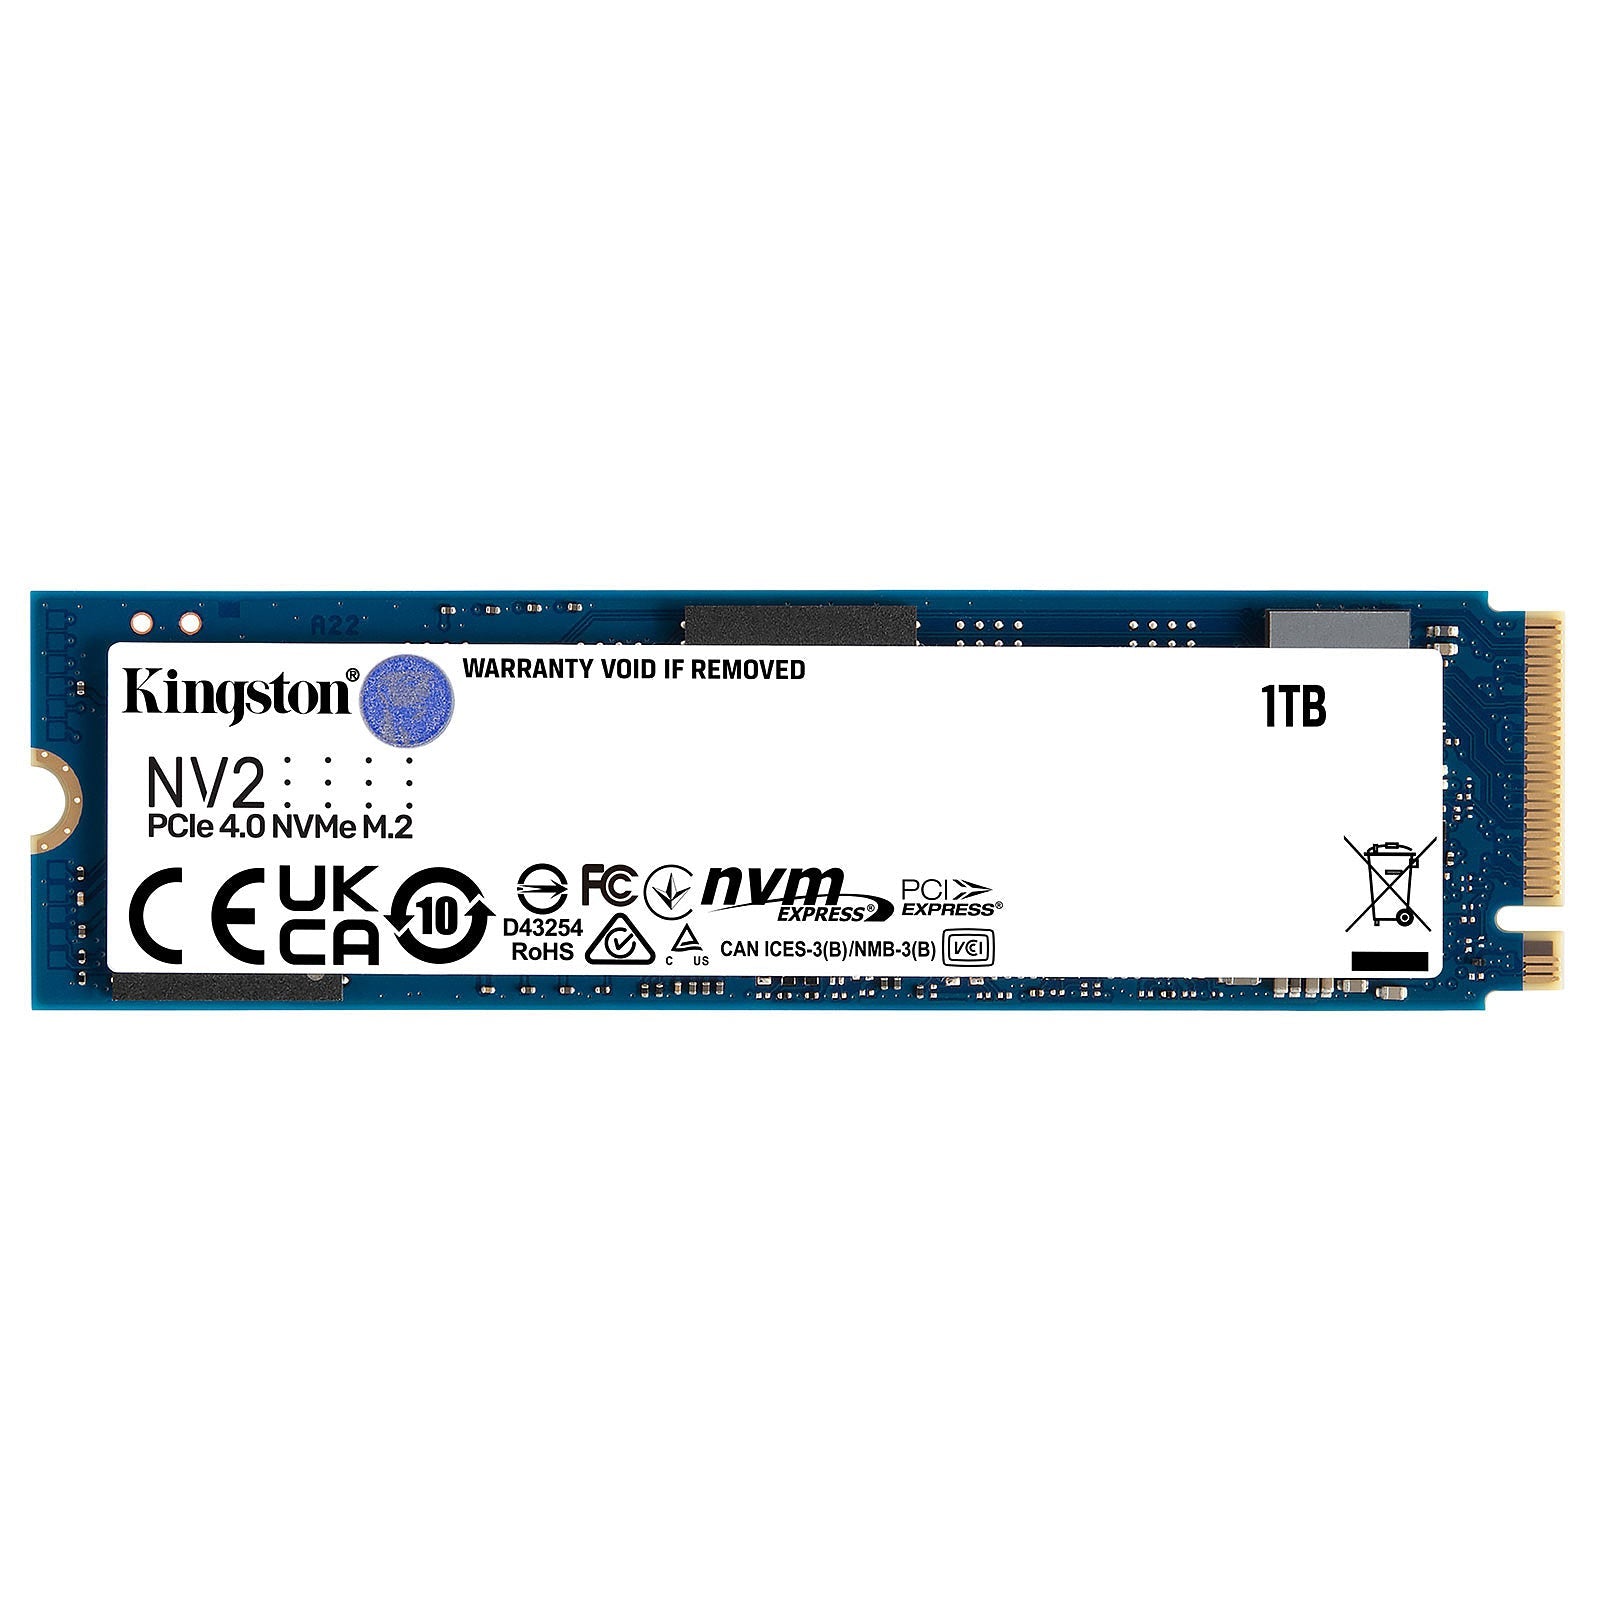 Kingston NV2 1TB PCIe 4.0 NVMe M.2 SSD - I Gaming Computer | Australia Wide Shipping | Buy now, Pay Later with Afterpay, Klarna, Zip, Latitude & Paypal